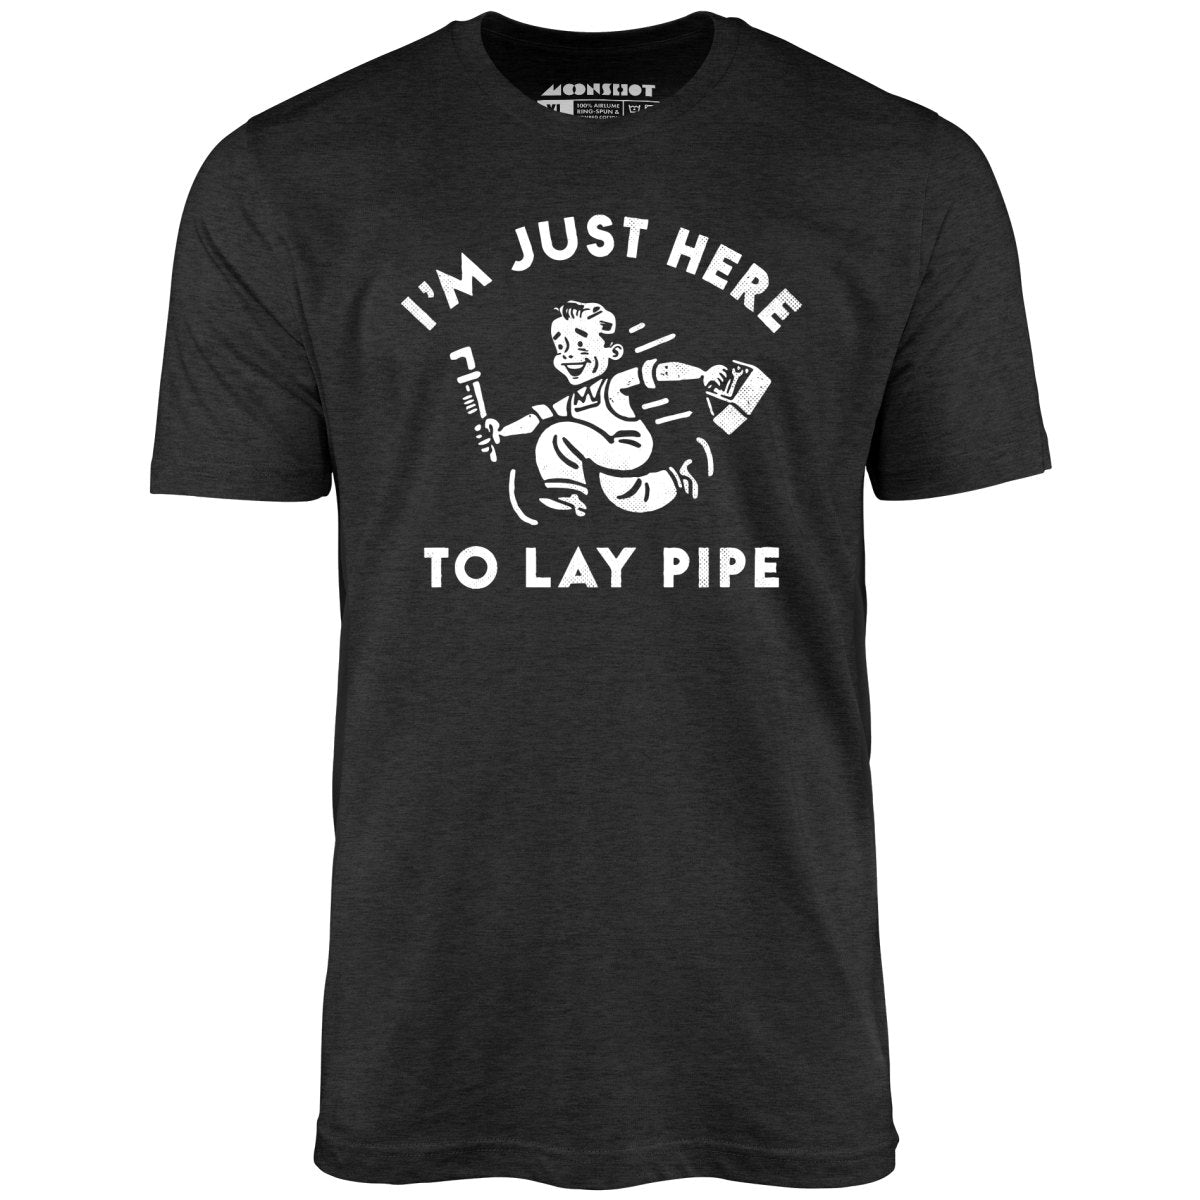 I'm Just Here to Lay Pipe - Unisex T-Shirt